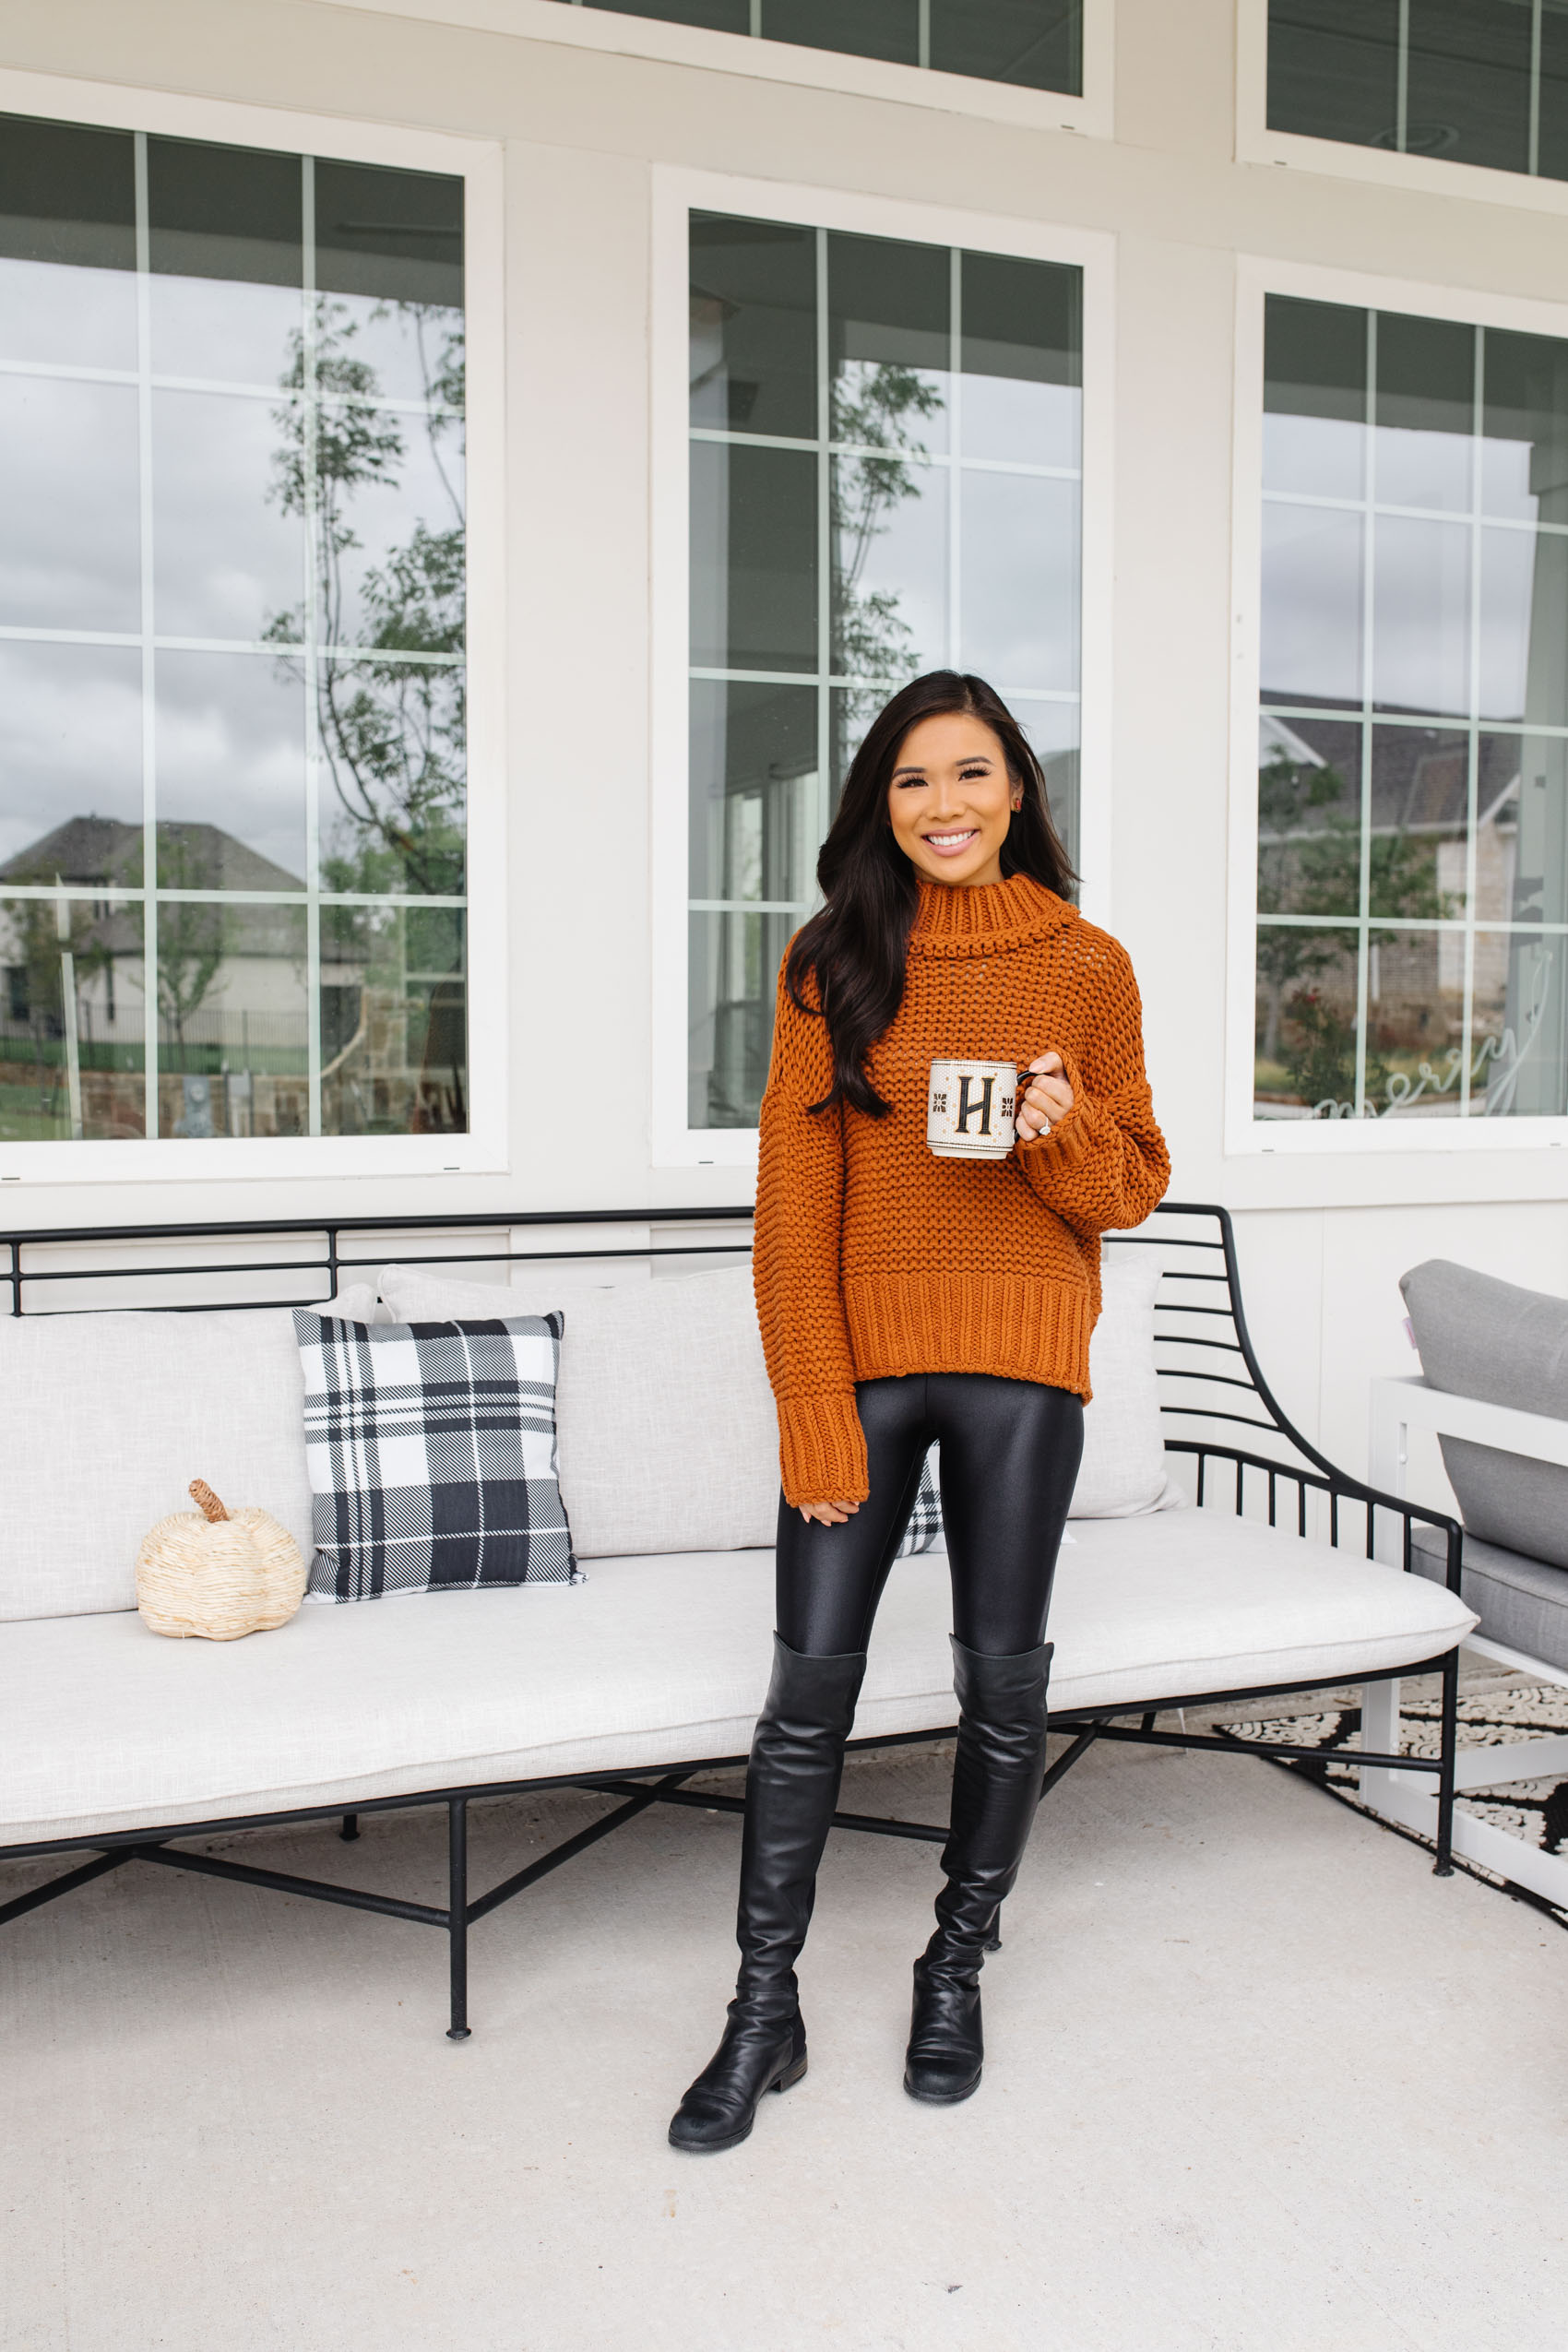 Blogger Hoang-Kim shares her affordable fall front porch decor including plaid pillows, faux pumpkins